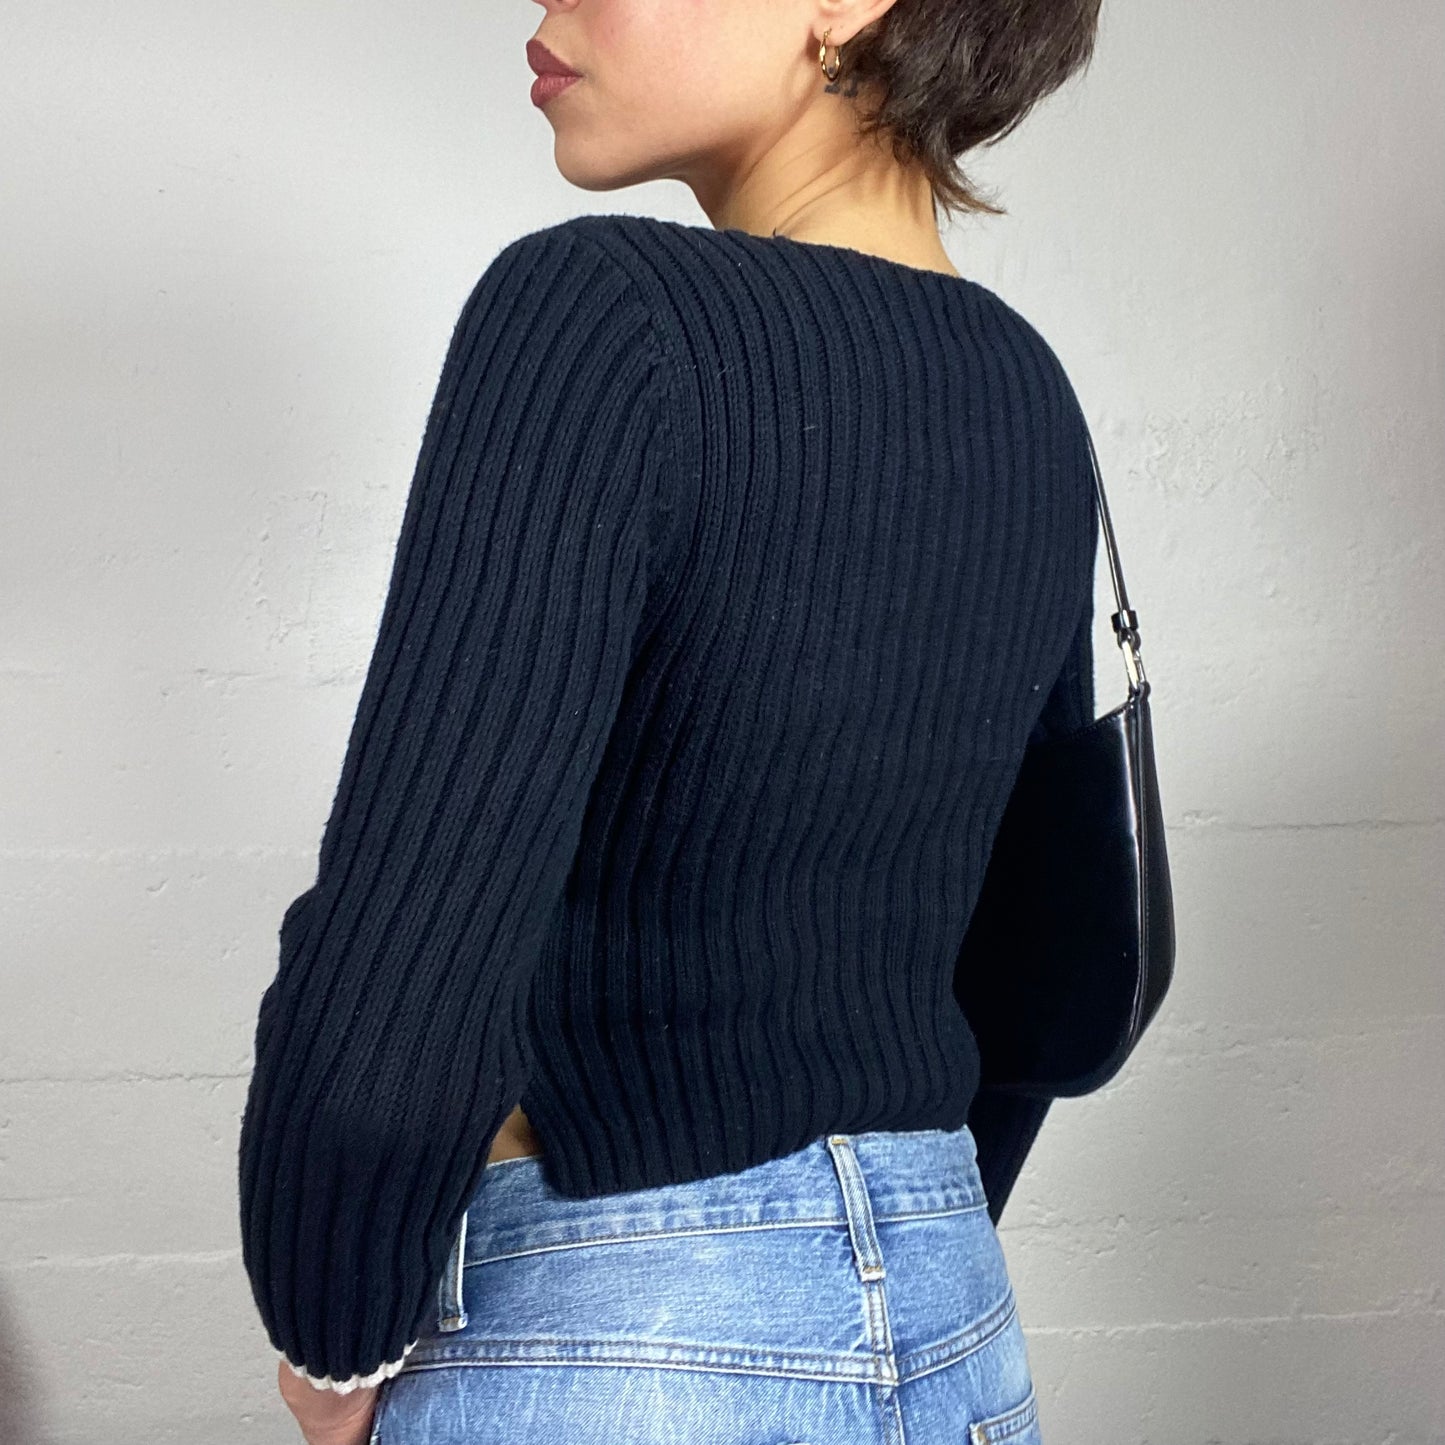 Vintage 2000's Pepe Jeans College Girl Black Knitted Pullover with Brand Print Detail (S/M)